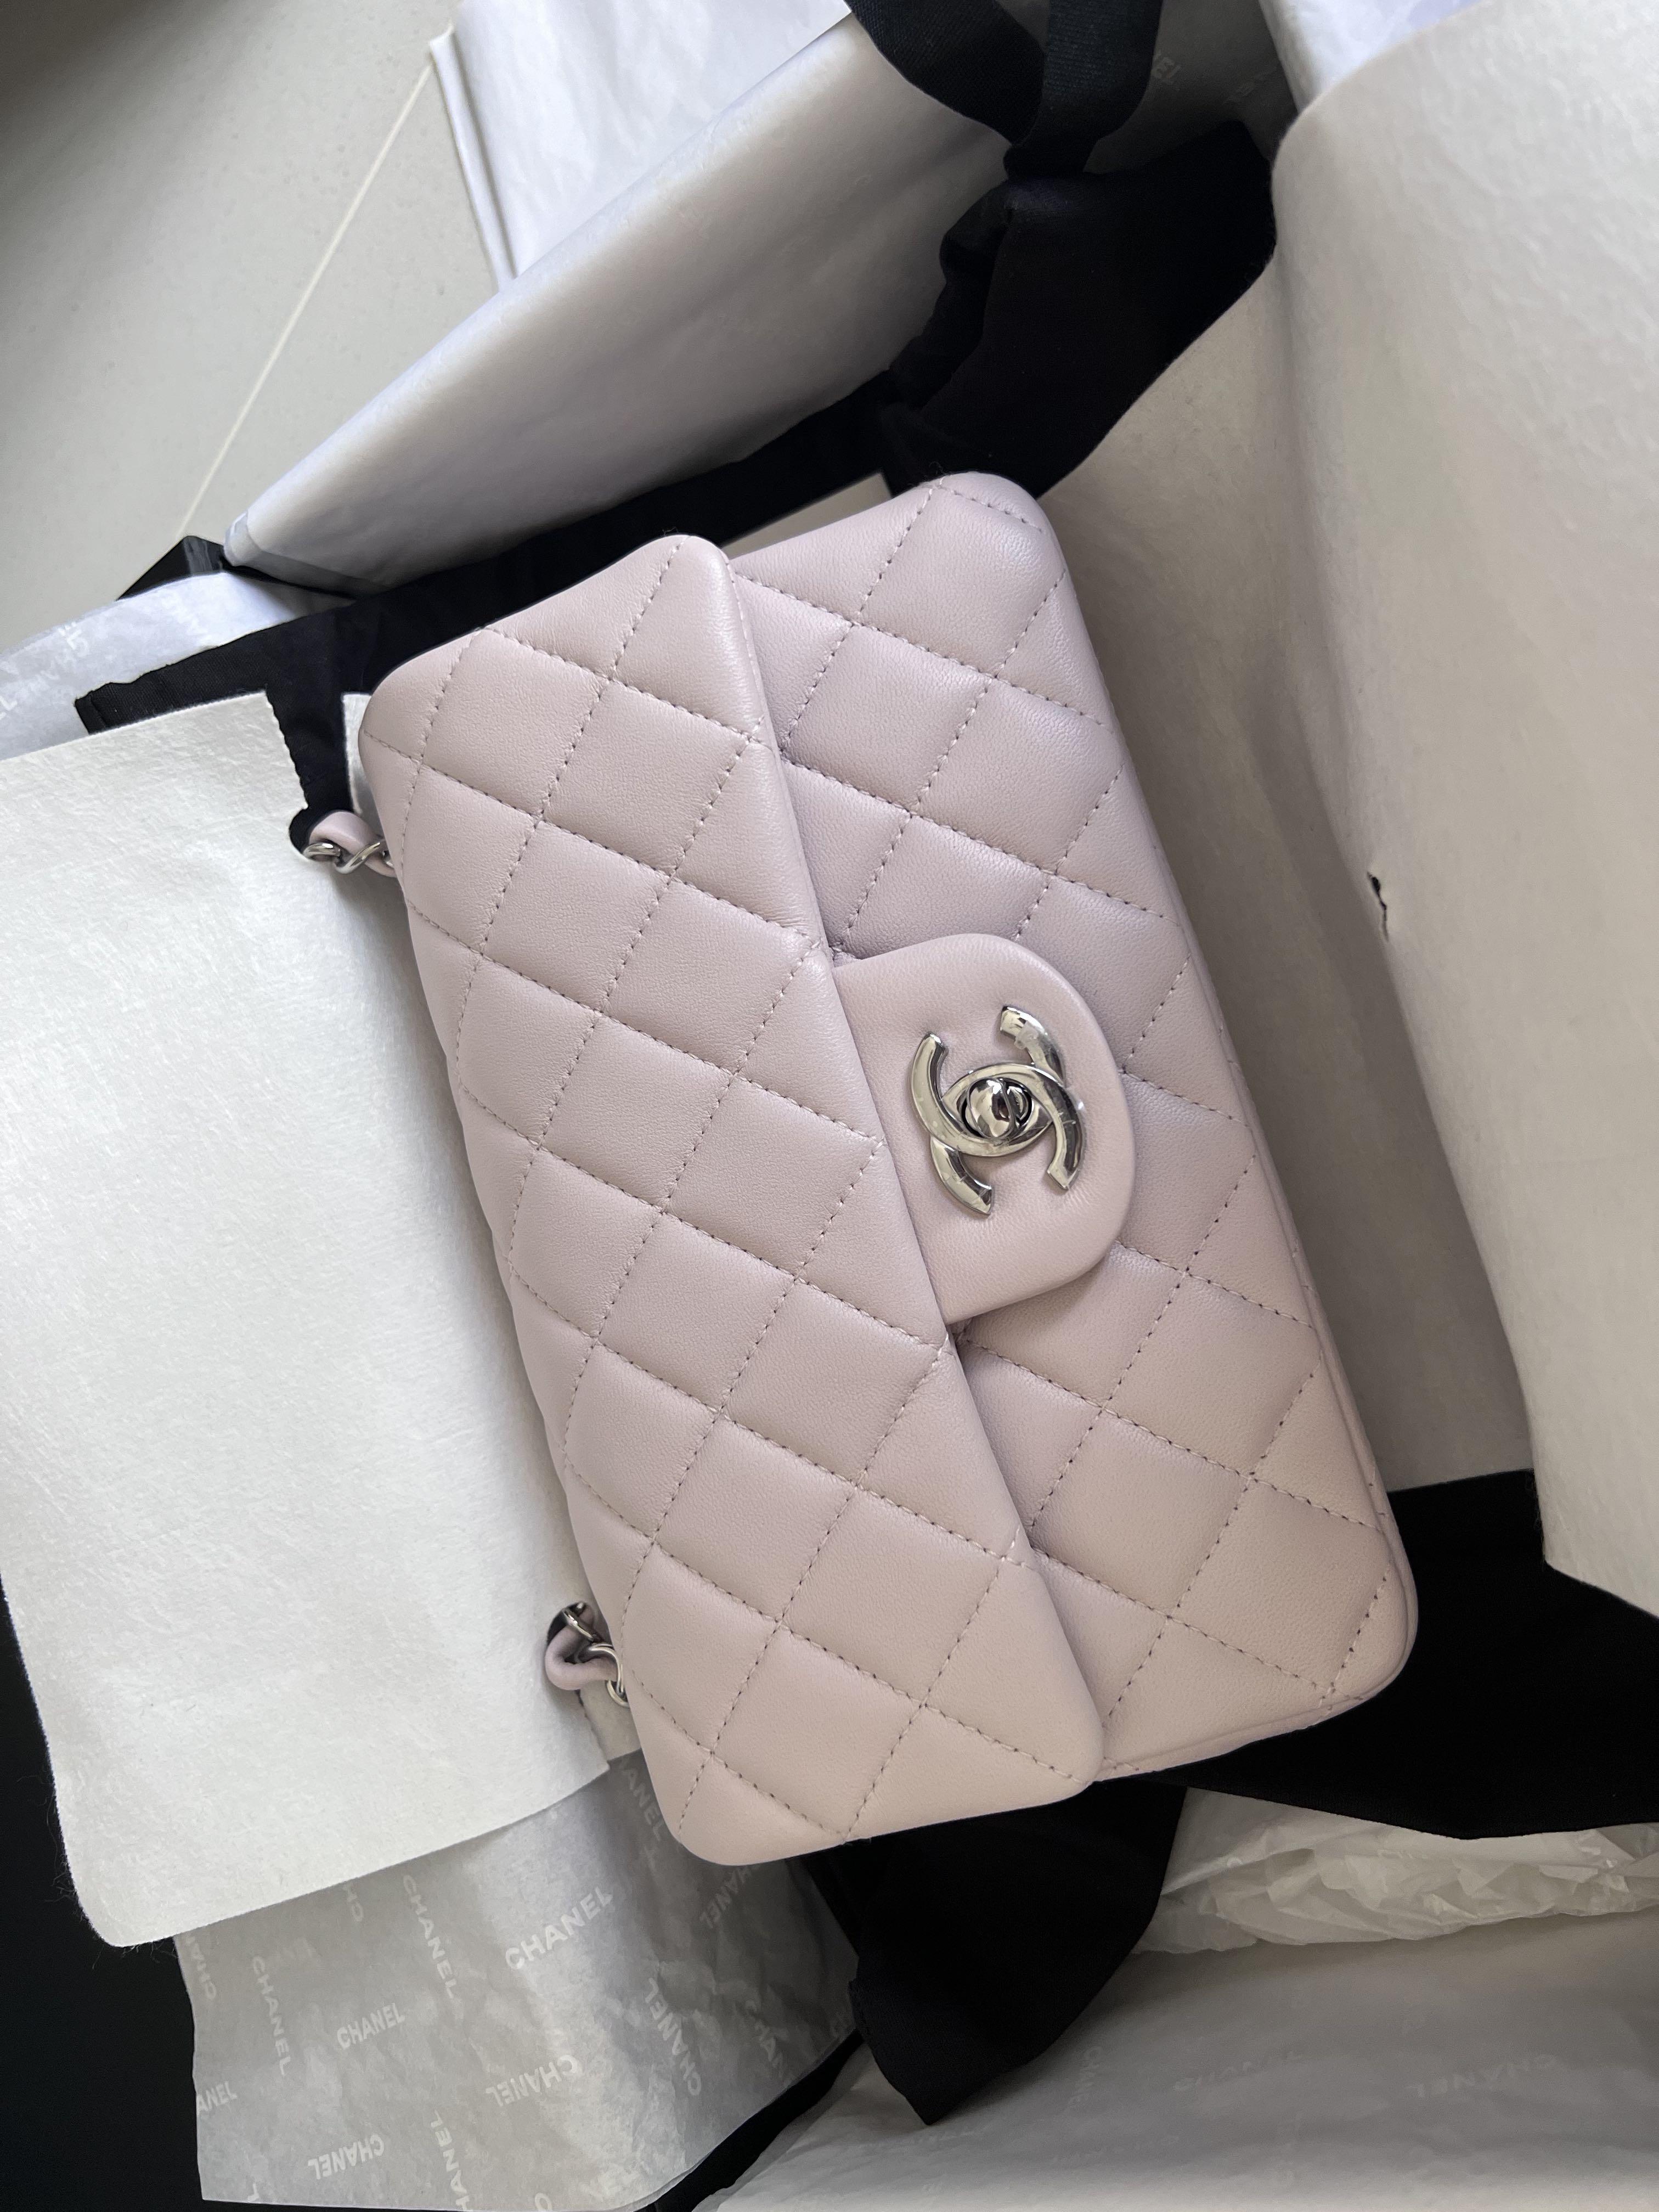 My Wife's New Chanel Mini Classic Rectangular Flap Bag Pink With